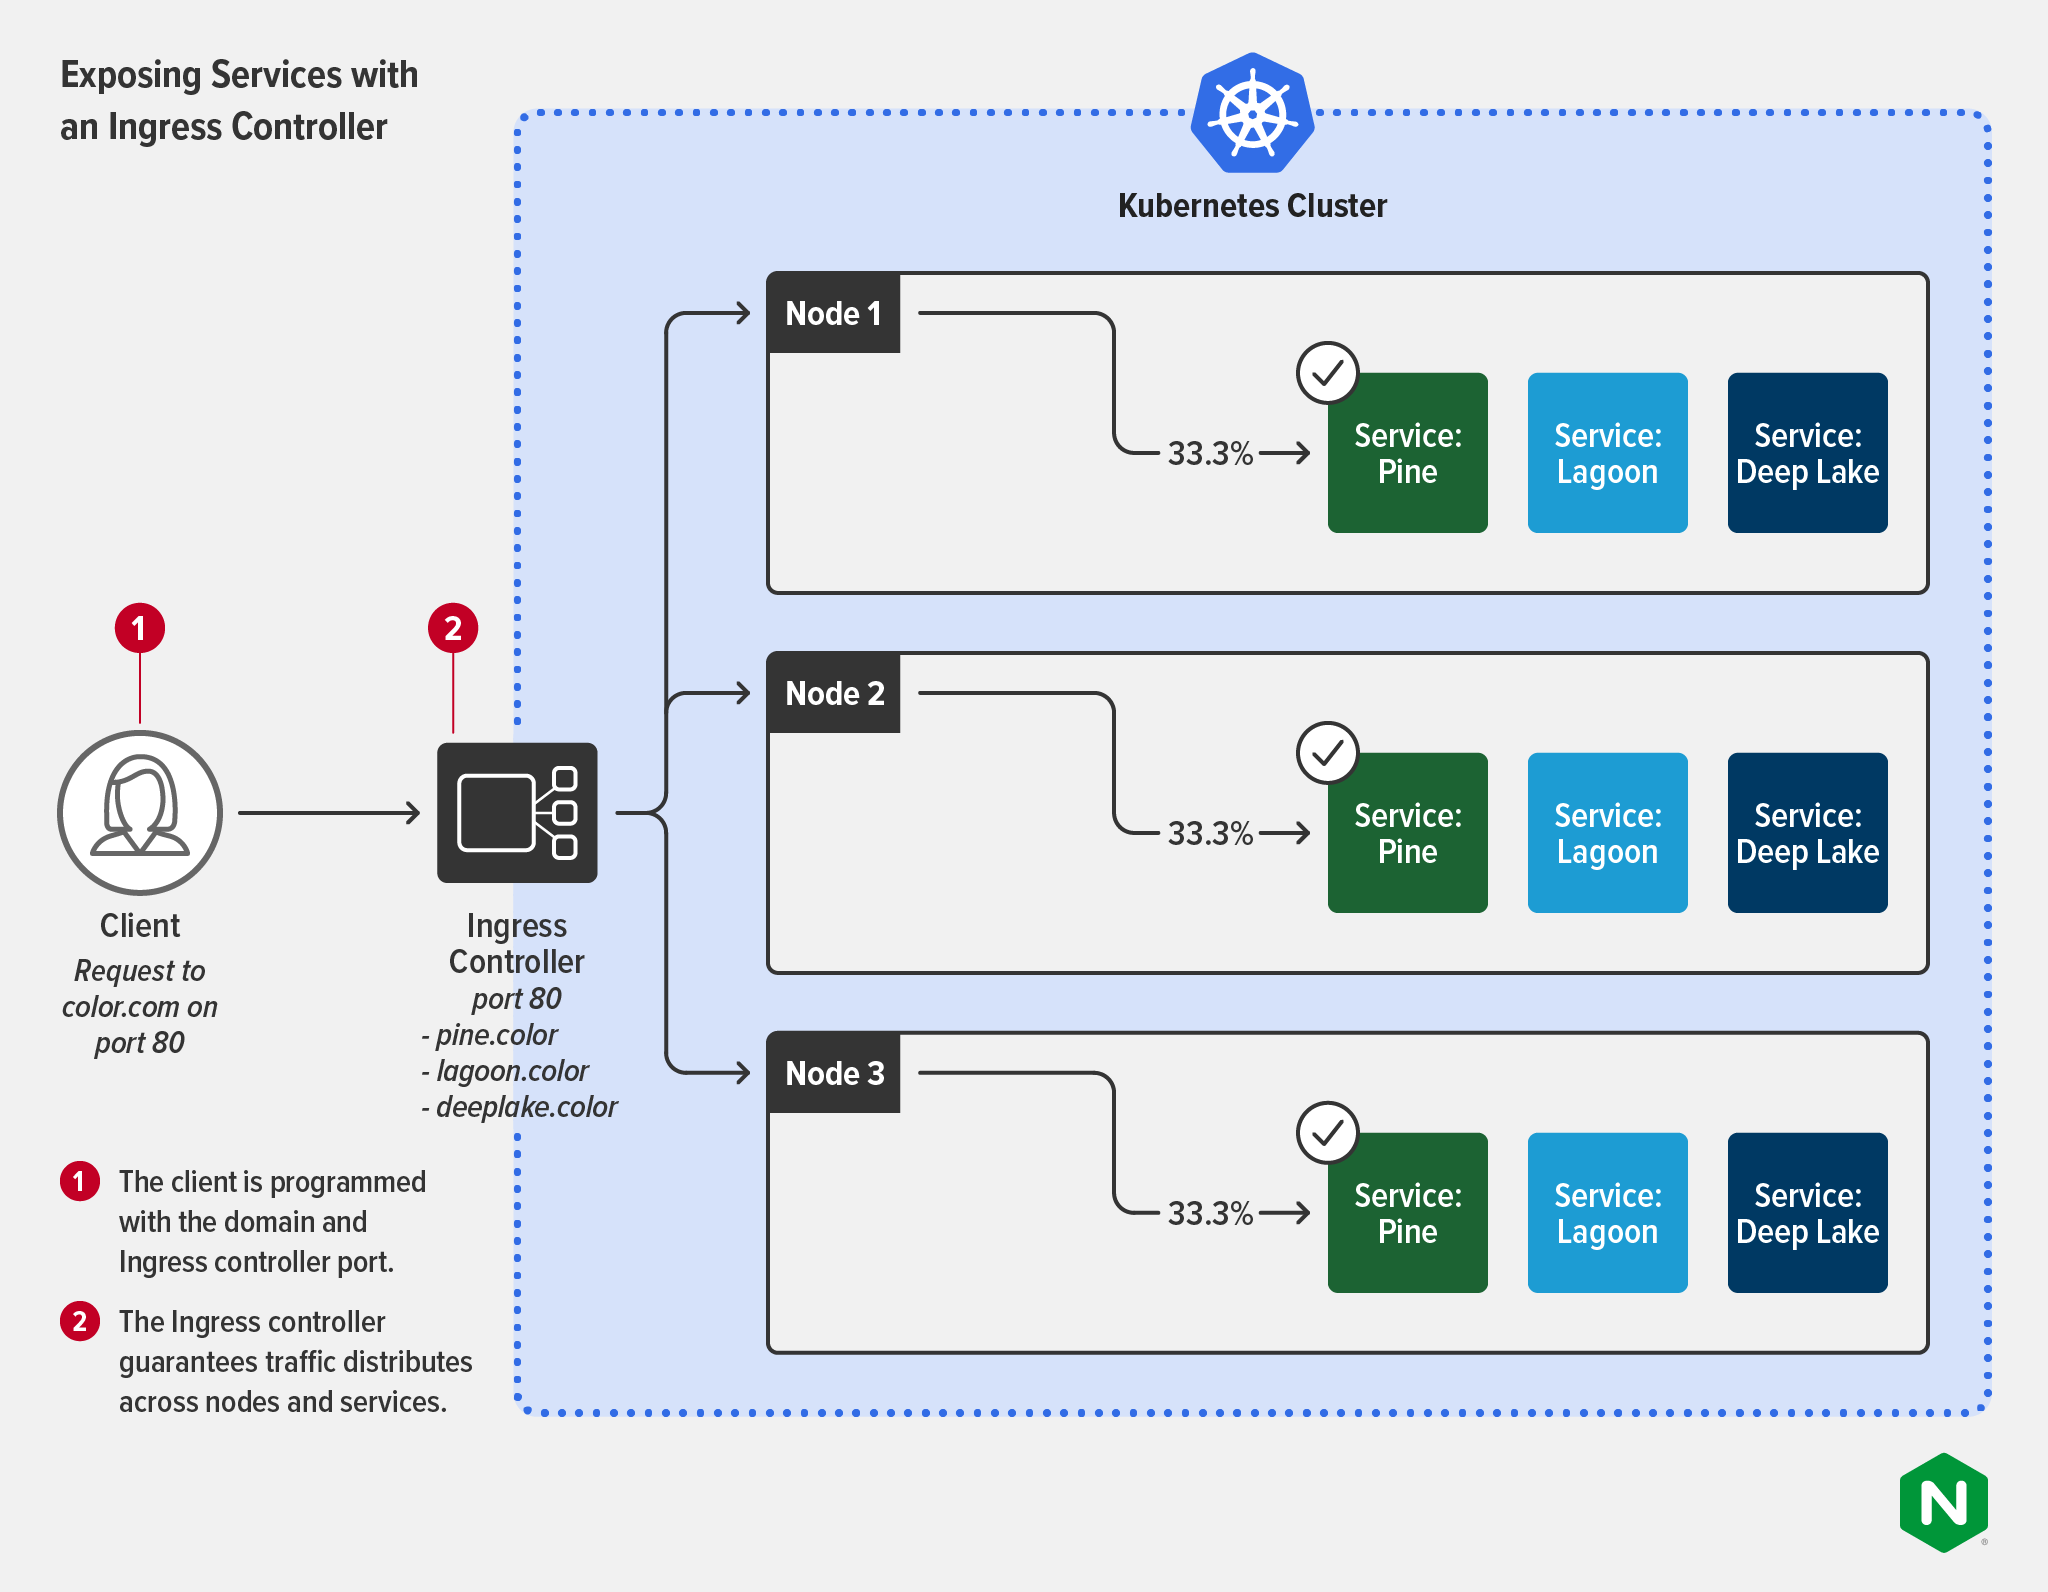 Topology diagram of exposing Kubernetes services with an Ingress controller